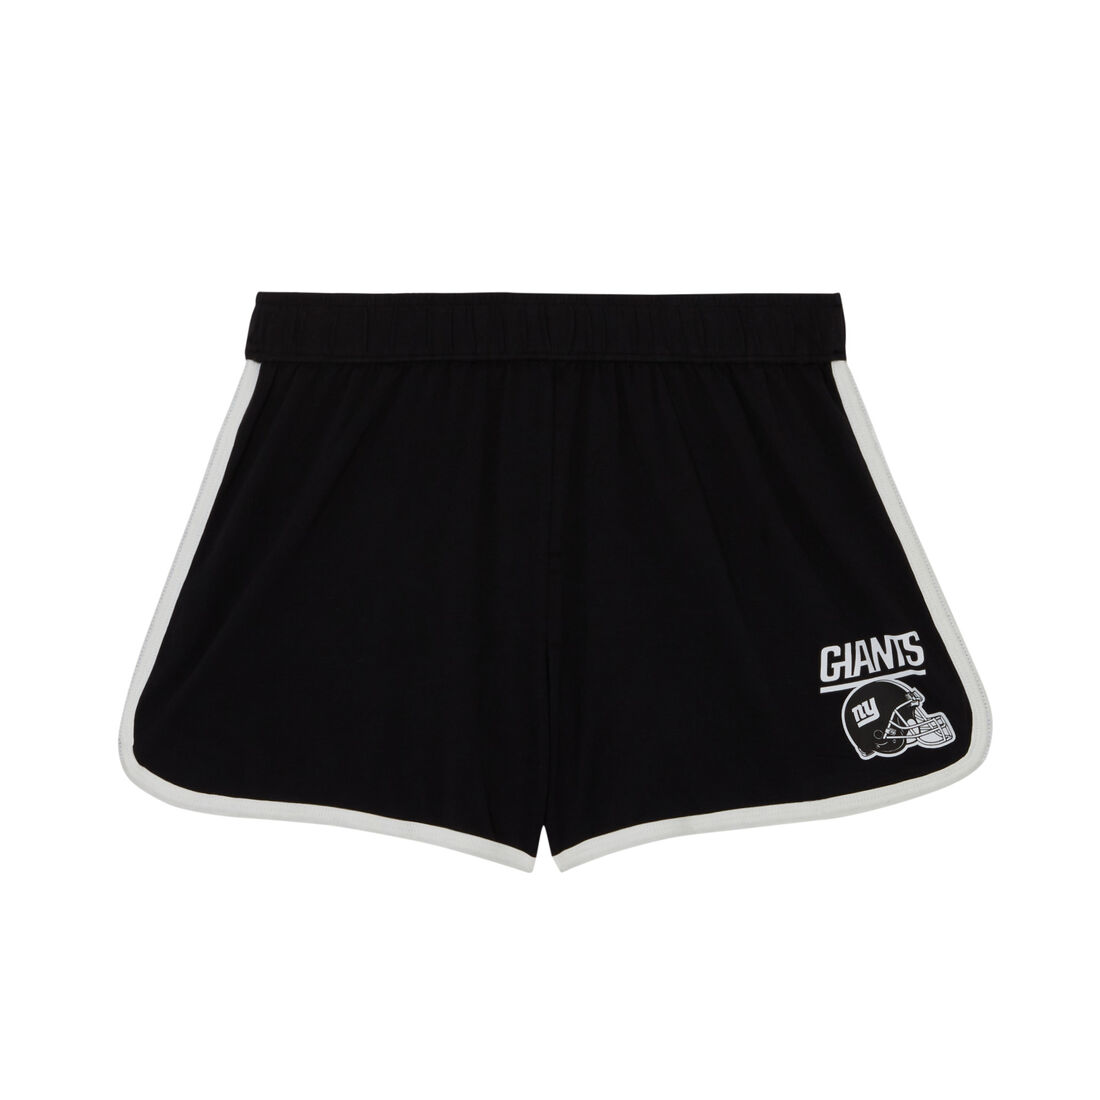 nfl giants print shorts-style boxes;